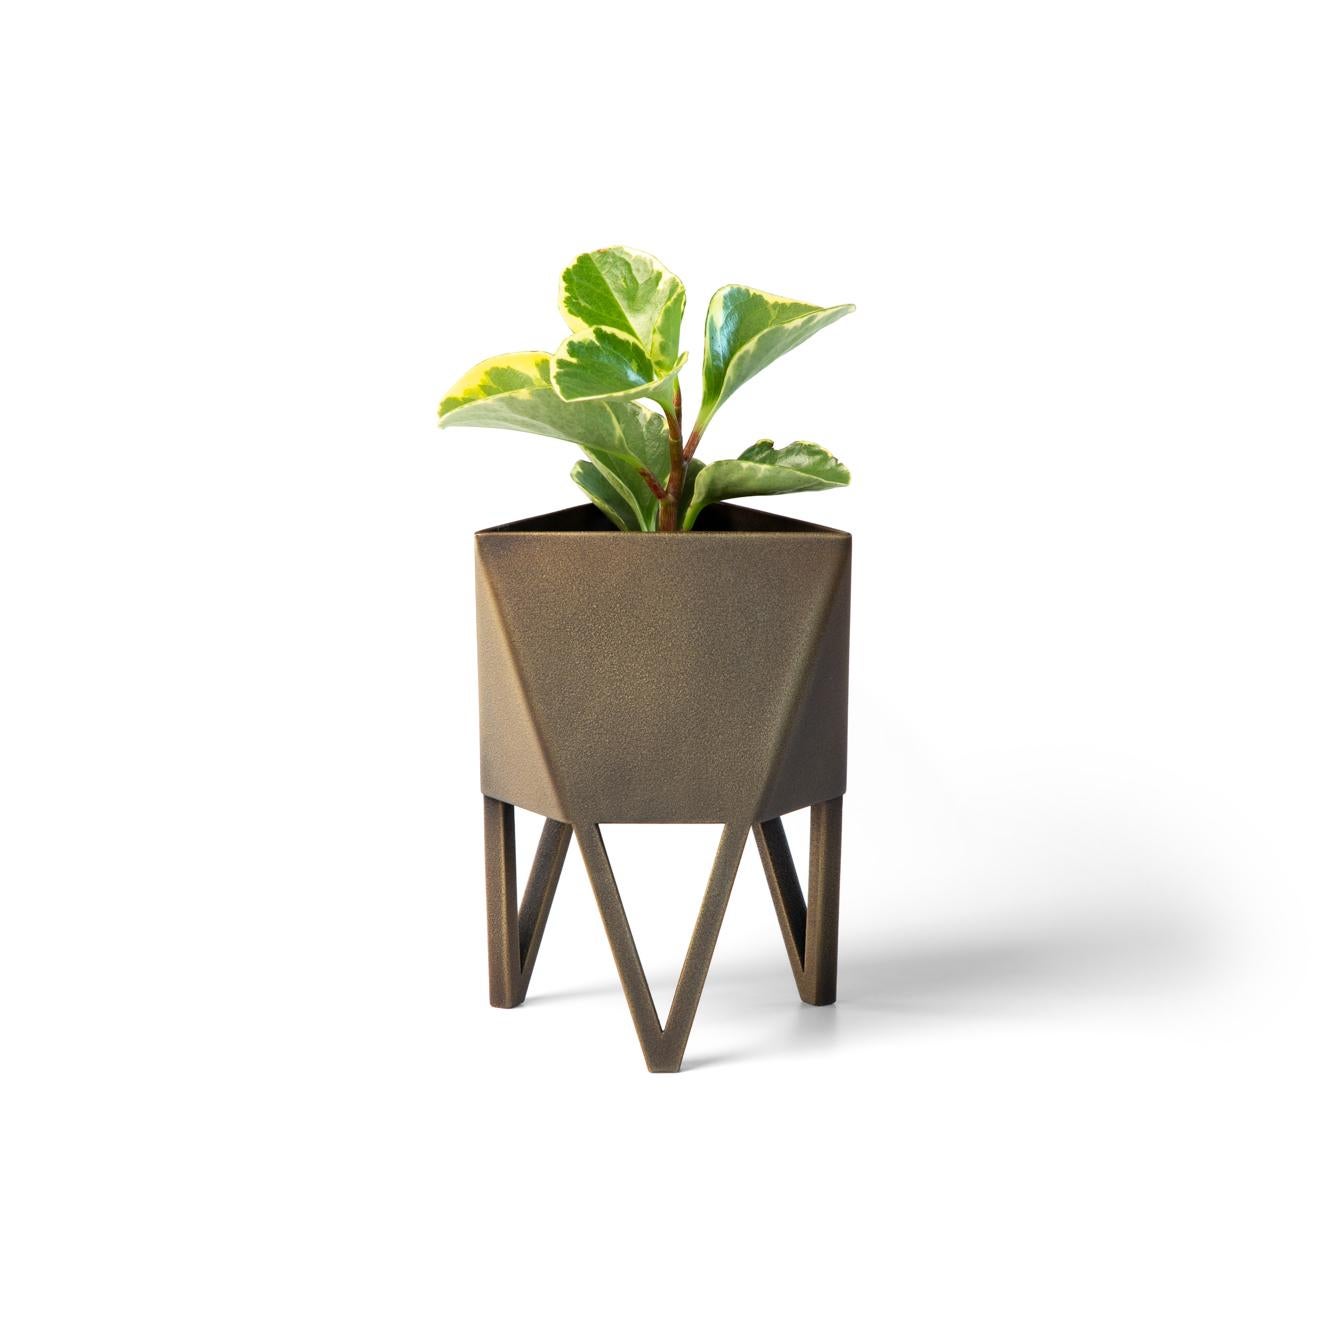 Small Deca Planter, Light Pink, Steel, Modern, Geometric by Force/Collide 7